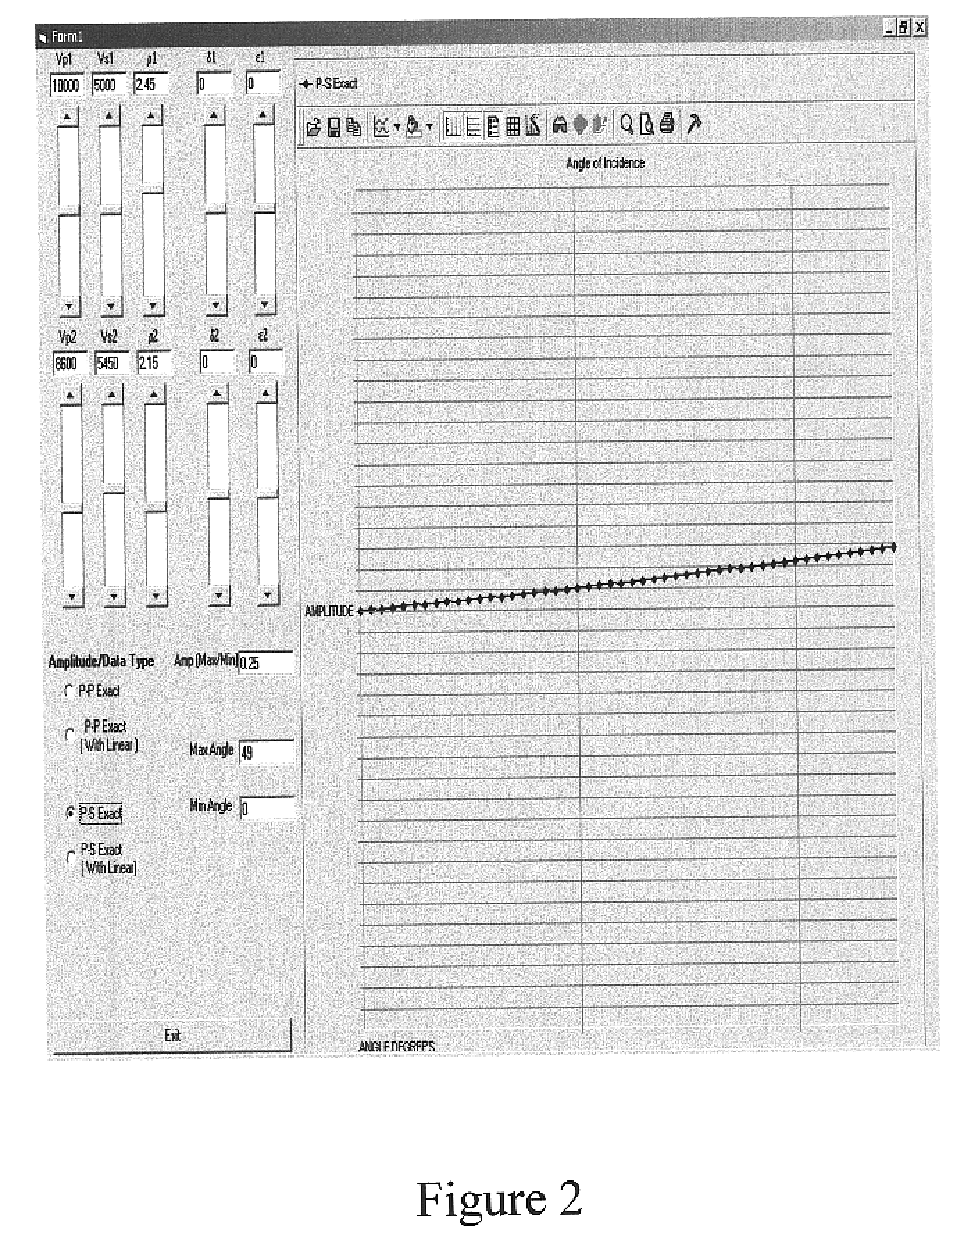 Method for generating P-S and S-S- seismic data and attributes from P-P seismic data